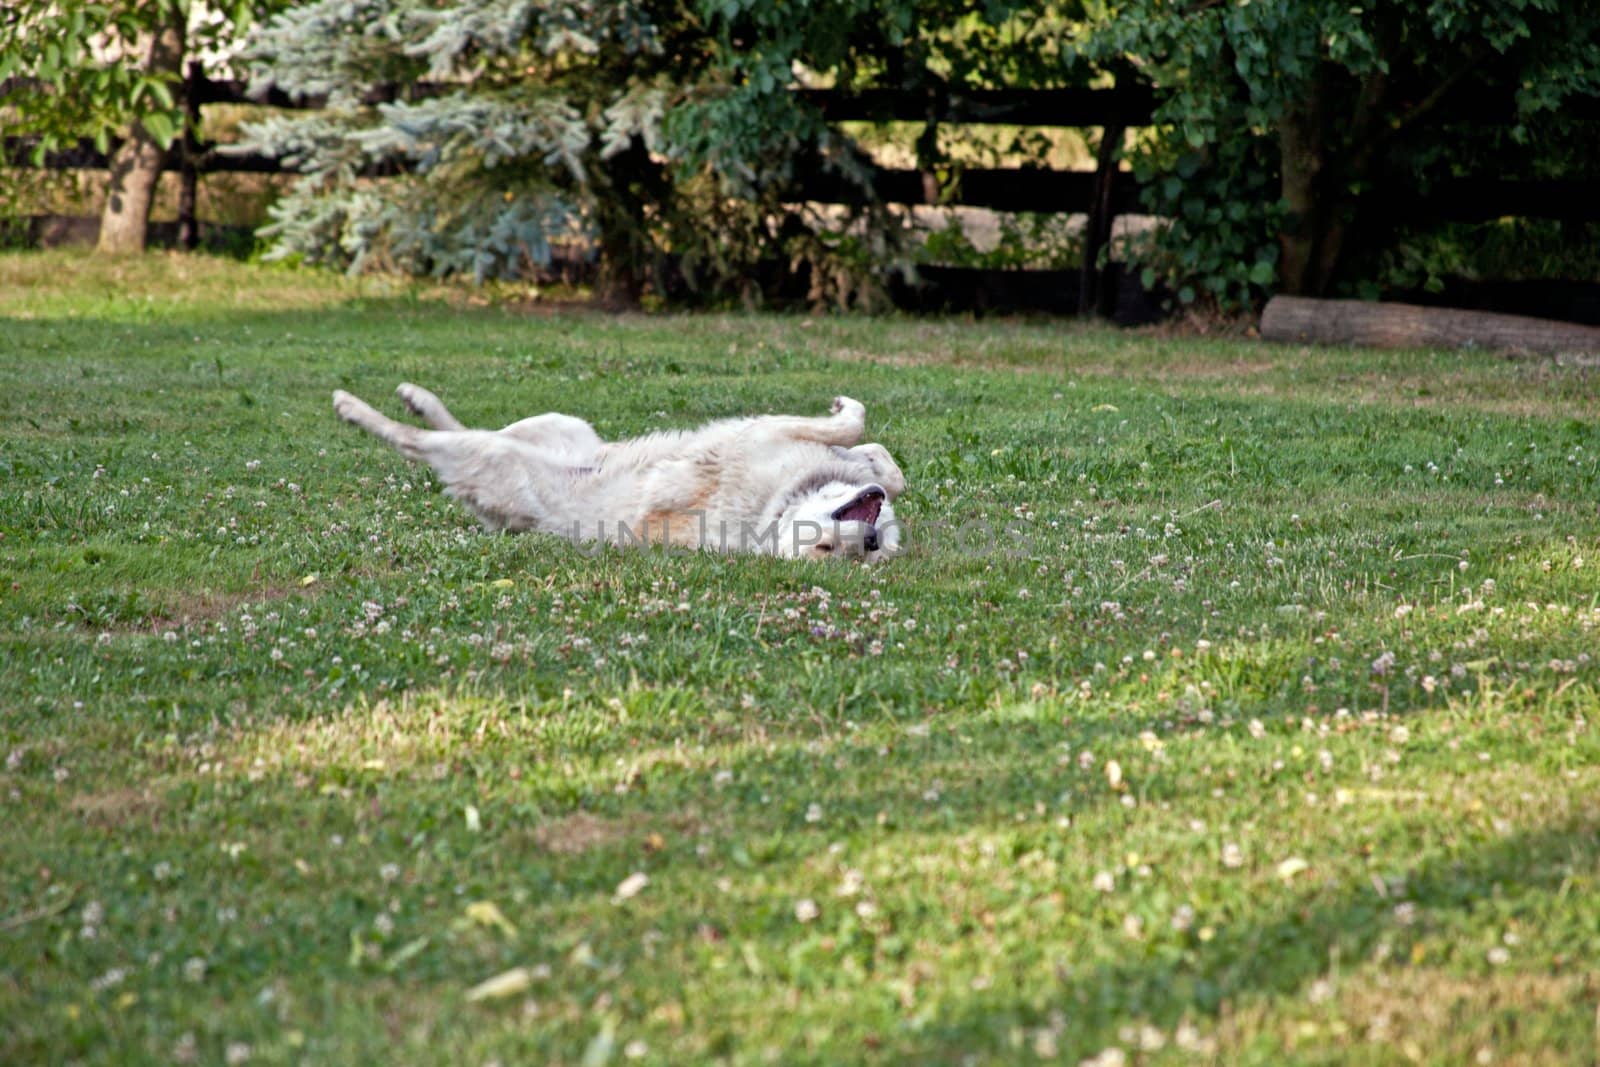 A dog is playing in the grass